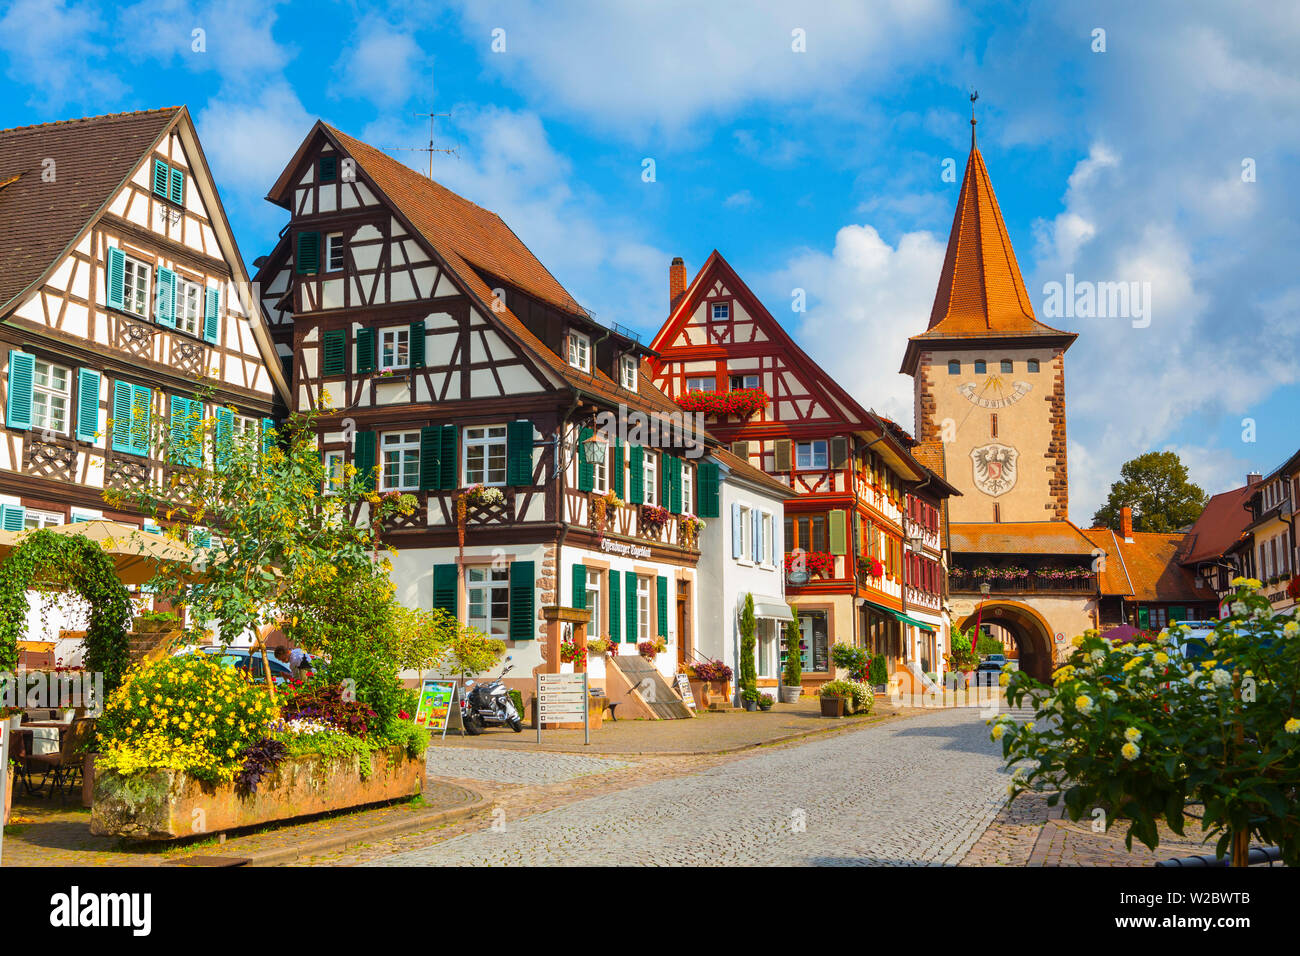 Oberturm Tower in Gengenbach's picturesque Altstad (Old Town), Gengenbach, Kinzigtal Valley, Black Forest, Baden Wurttemberg, Germany, Europe Stock Photo